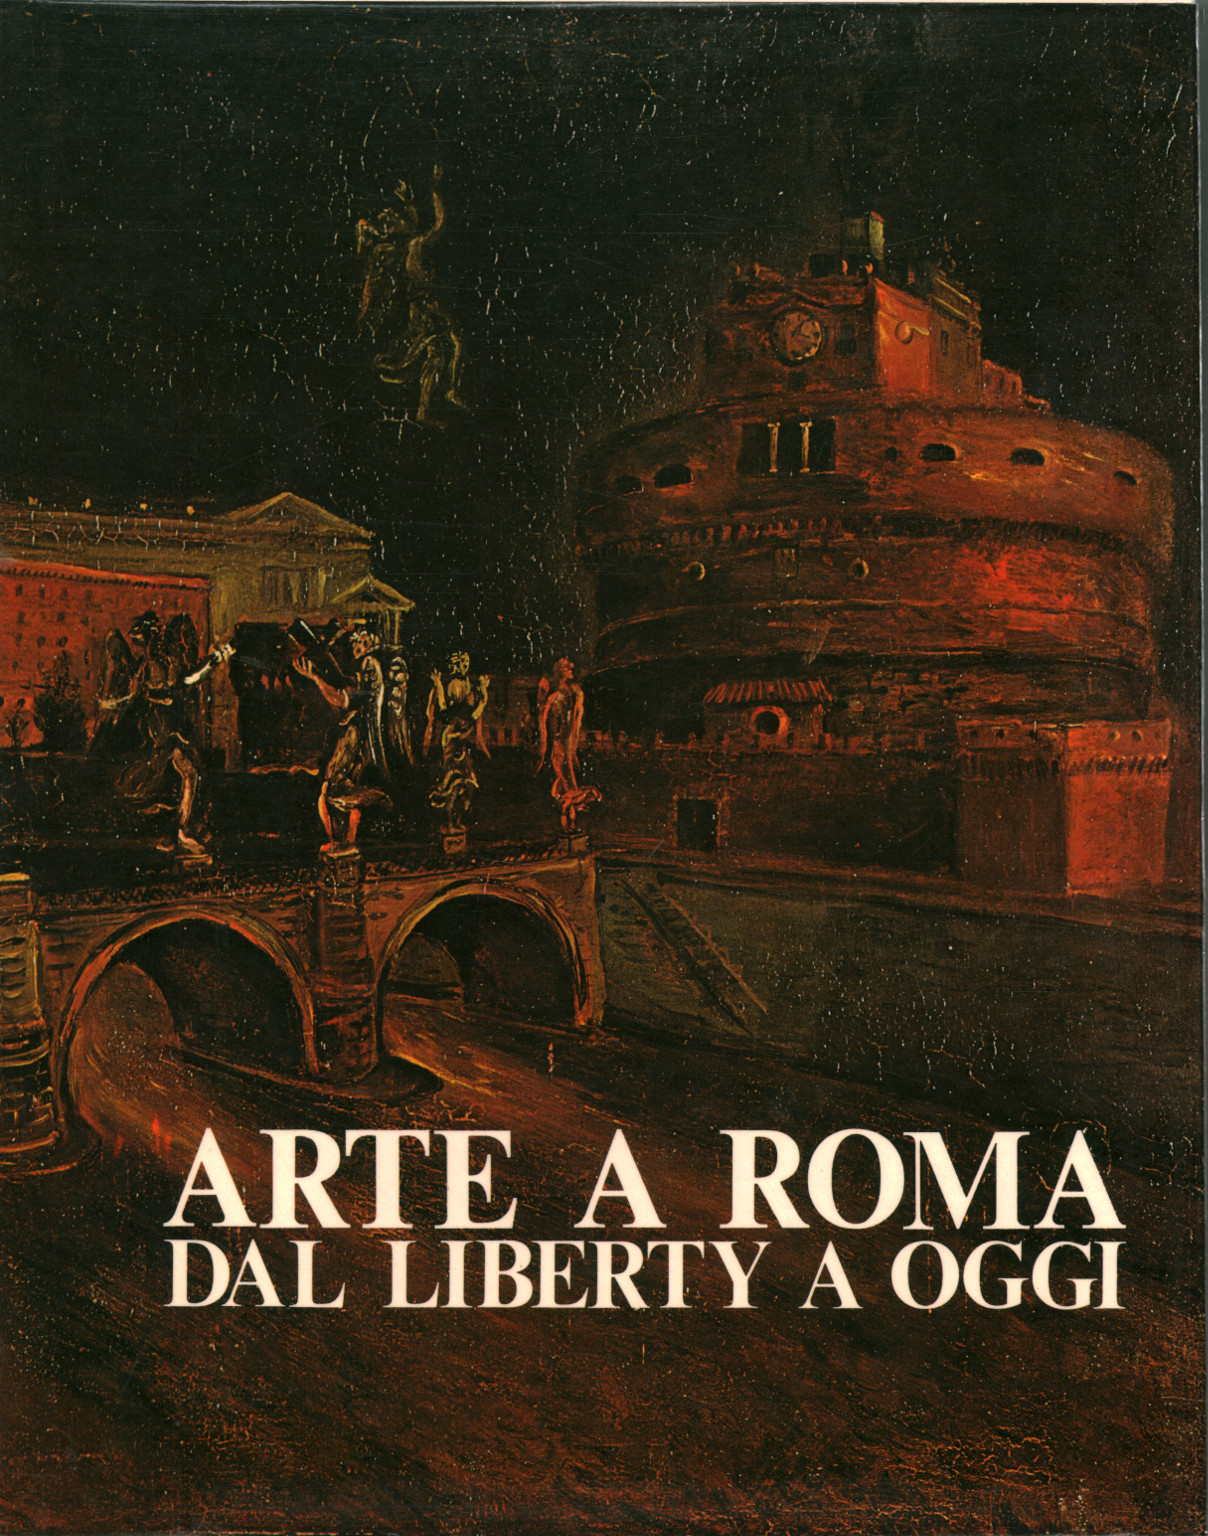 Art in Rome from the art nouveau to the present, AA.VV